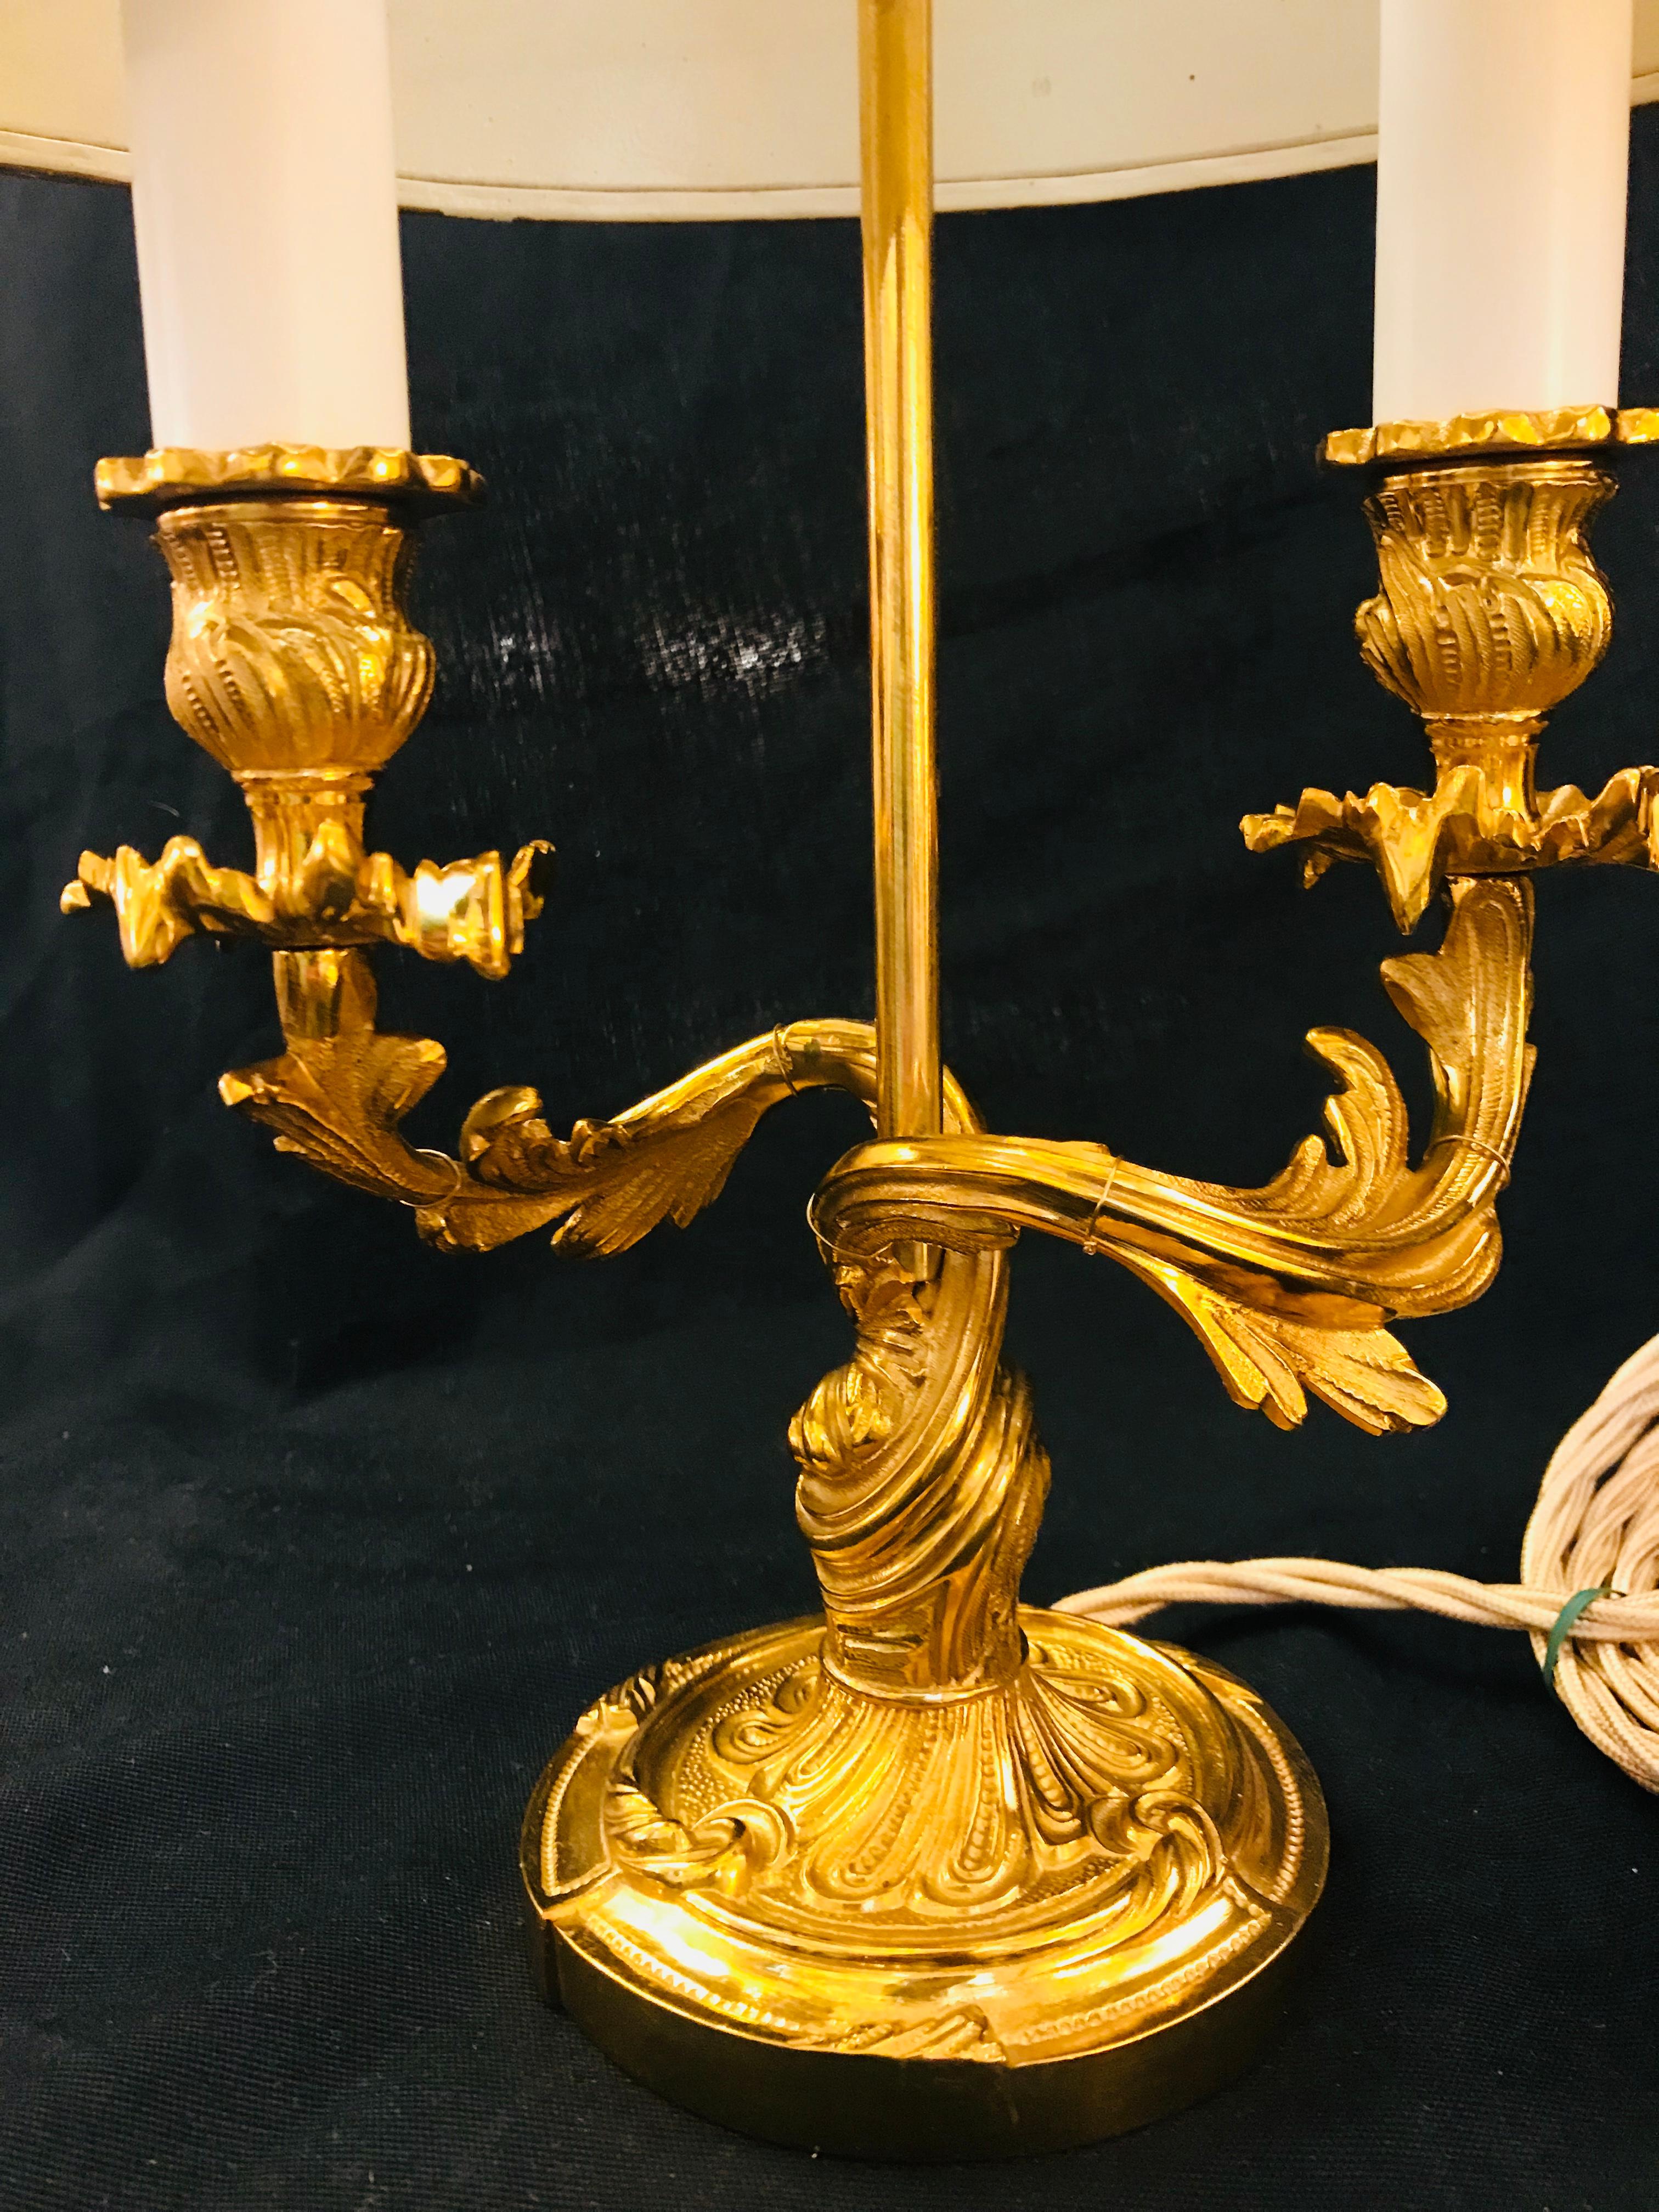 This Louis XV style gilt bronze lamp resume the taste of Rococo period decoration. As this, vegetal motifs are all-over this piece and it features great elegance and opulence in the forms. The stem has got undulations and curls and is topped with a